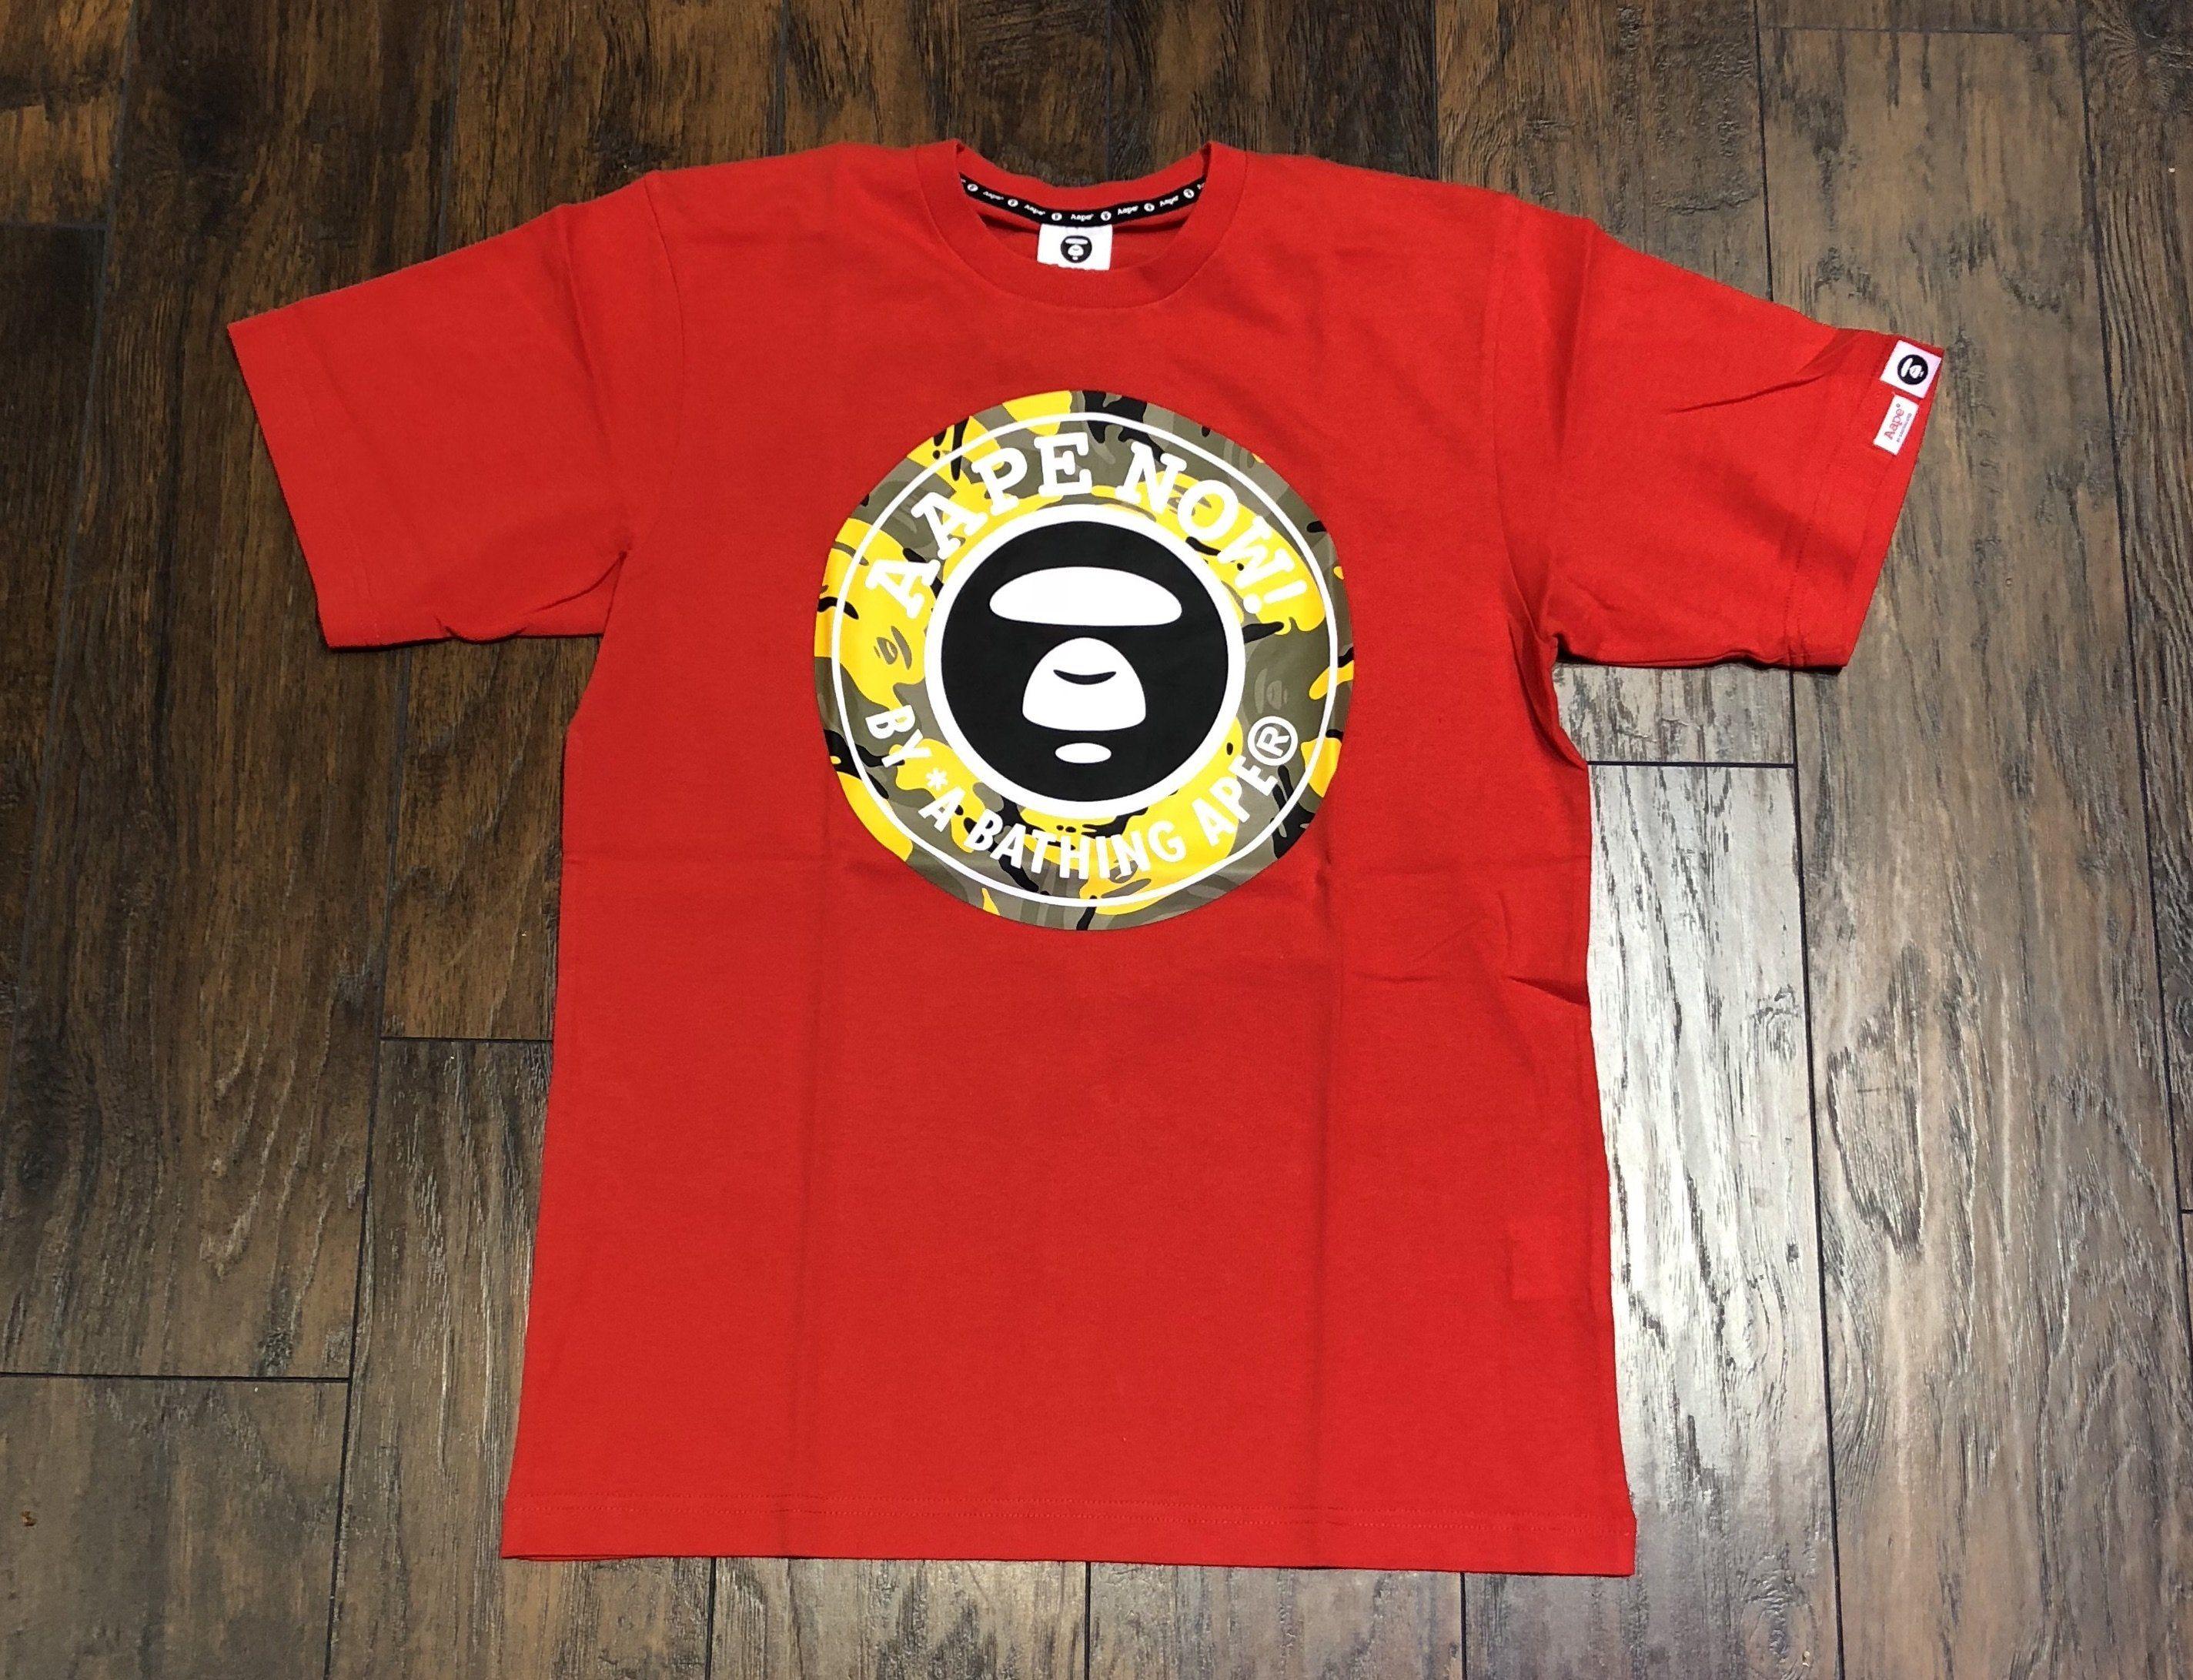 Red Bathing Ape Logo - Aape by a Bathing Ape Theme Logo Tee (Red / Yellow) – LacedUp